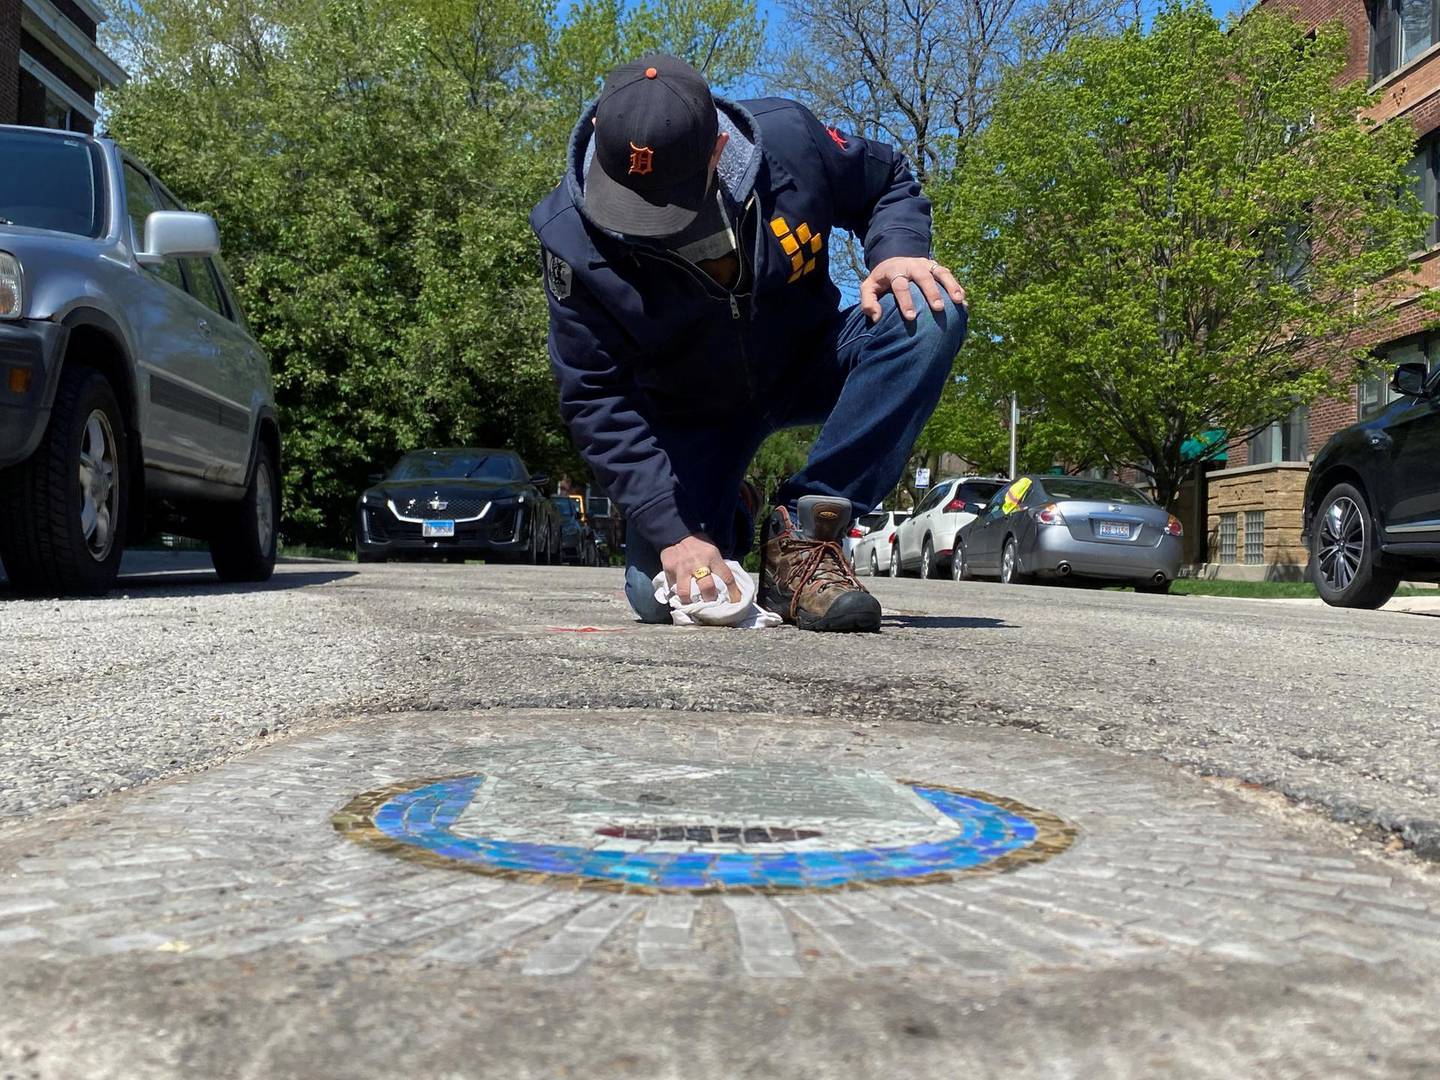 Chicago artist Jim Bachor creates four pandemic-themed pothole mosaics on the city's North Side, during the coronavirus disease (COVID-19) outbreak in Chicago, Illinois, U.S., May 20, 2020. Picture taken May 20, 2020. REUTERS/Brendan O'Brien